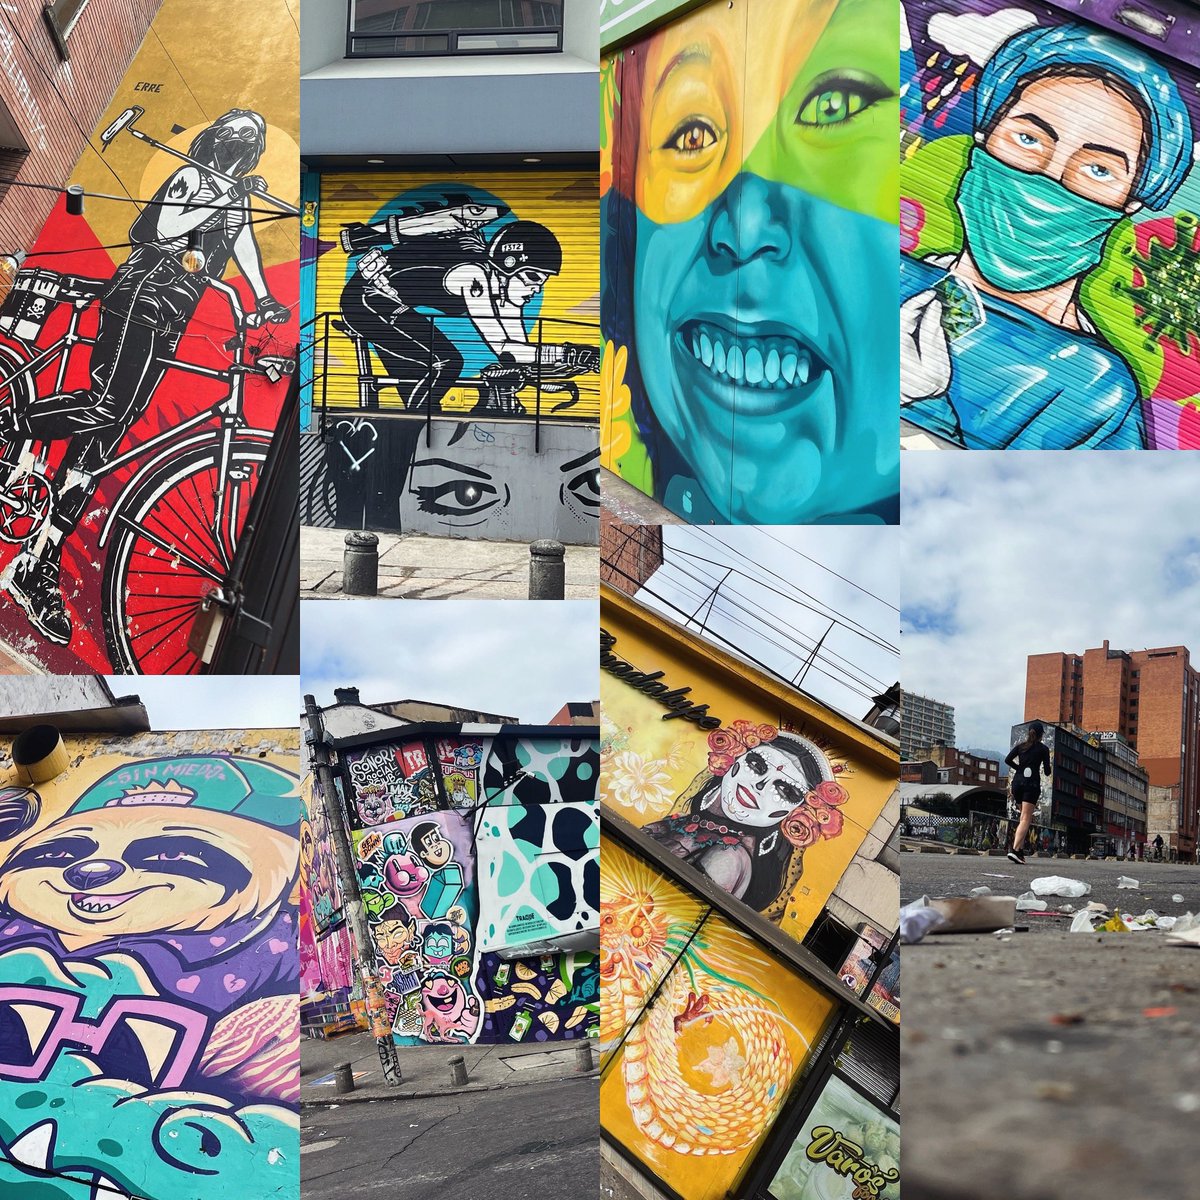 GM & Happy Mother's Day 🫶❤️

Wanted to share something special about Bogotá - the art @ graffiti scene is 🔥. 

Check out just a few of our favorites... even some #nft related ones 👀 🦥 & 🦠

#artiseverywhere #appreciatebeauty #enjoythelittlethings